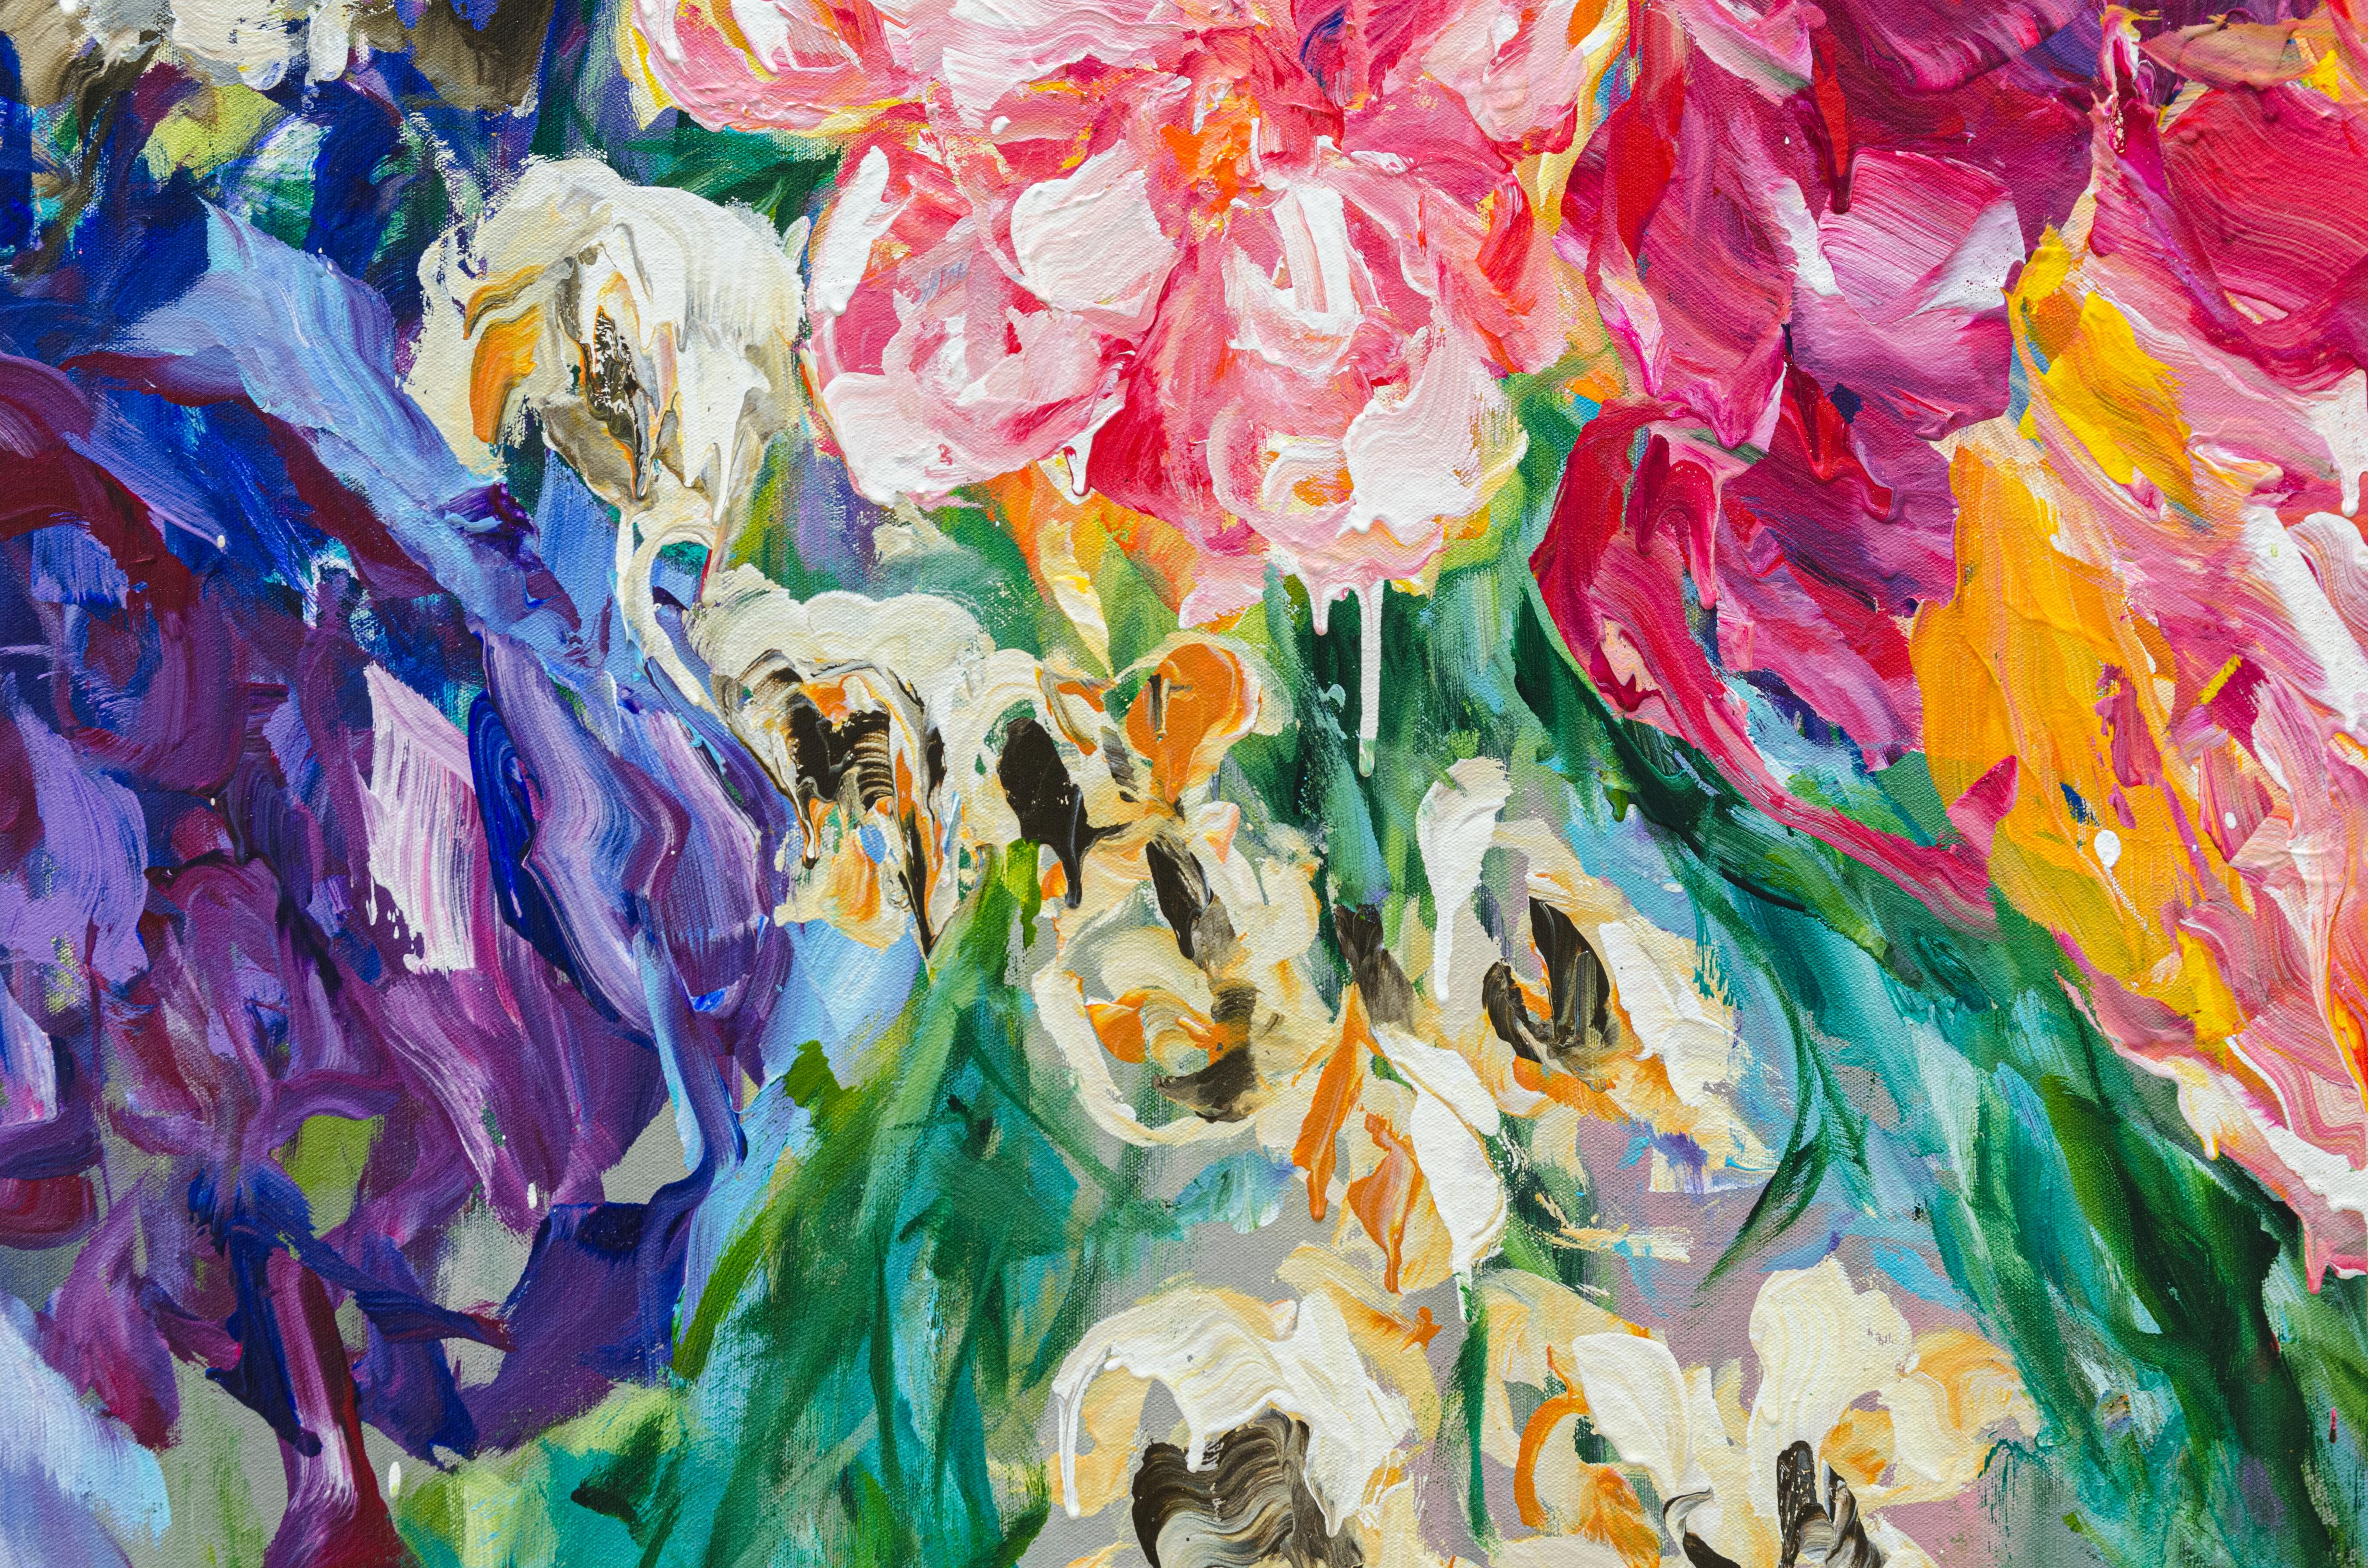 Fragrance of Spring - Abstract Painting by Ramona Stelzer